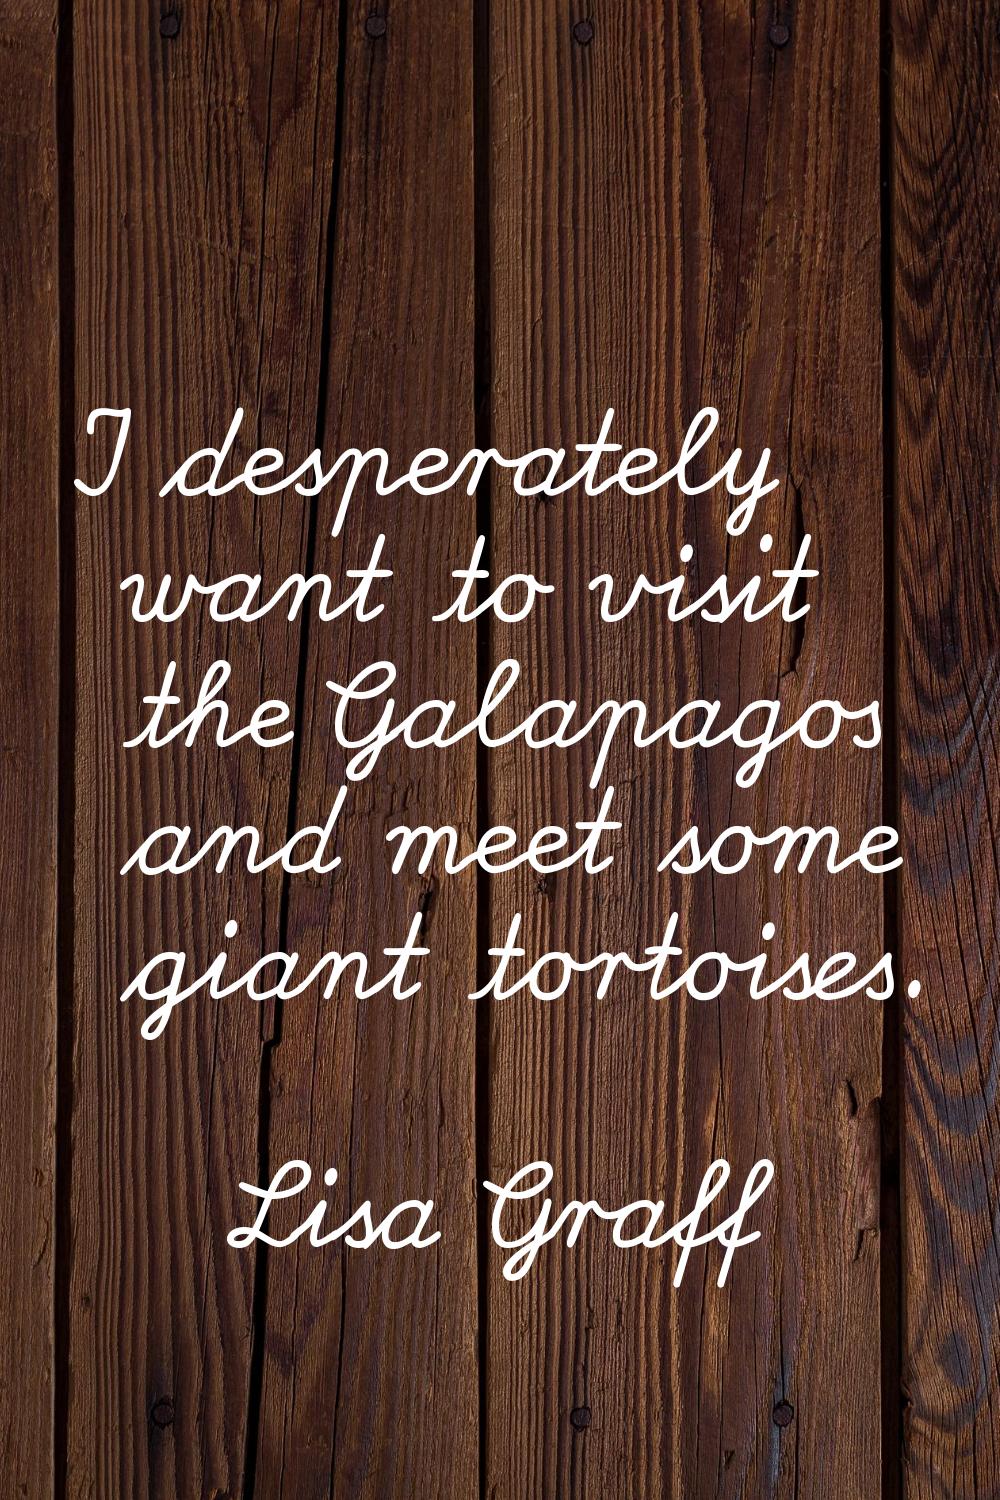 I desperately want to visit the Galapagos and meet some giant tortoises.